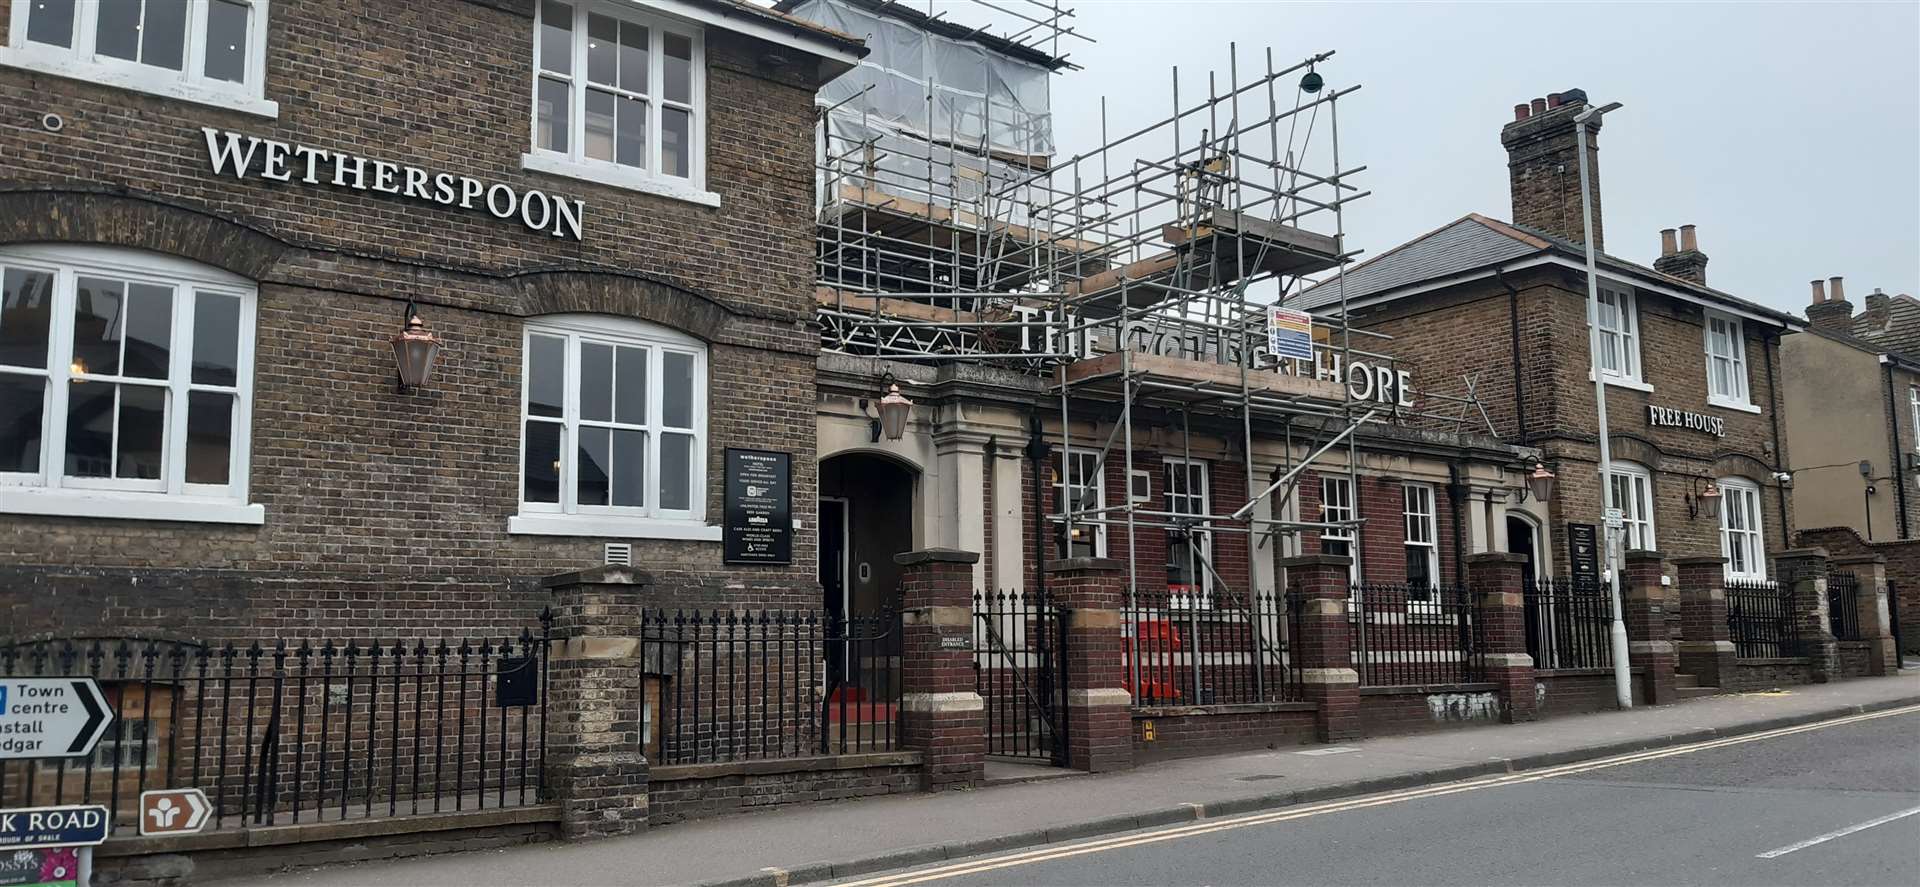 The Golden Hope pub has scaffolding up as builders fix its leaking dome window